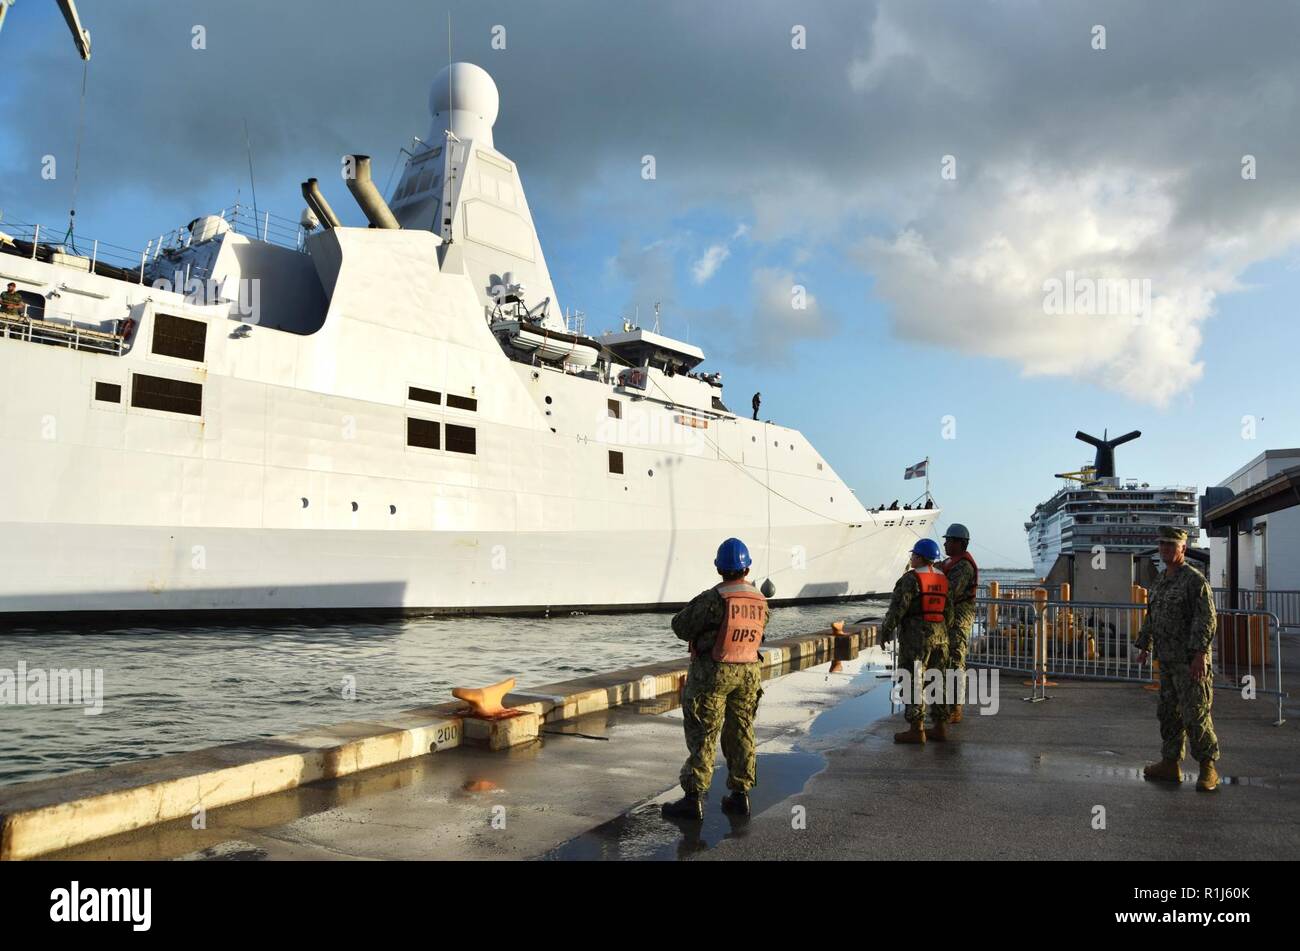 KEY WEST, Florida (Oct. 5, 2018) HNLMS Friesland (P842), a Holland-class offshore patrol vessel operated by the Royal Netherlands Navy, moors at Naval Air Station Key West's Mole Pier. NAS Key West is a state-of-the-art facility for air-to-air combat fighter aircraft of all military services and provides world-class pierside support to U.S. and foreign naval vessels. Stock Photo